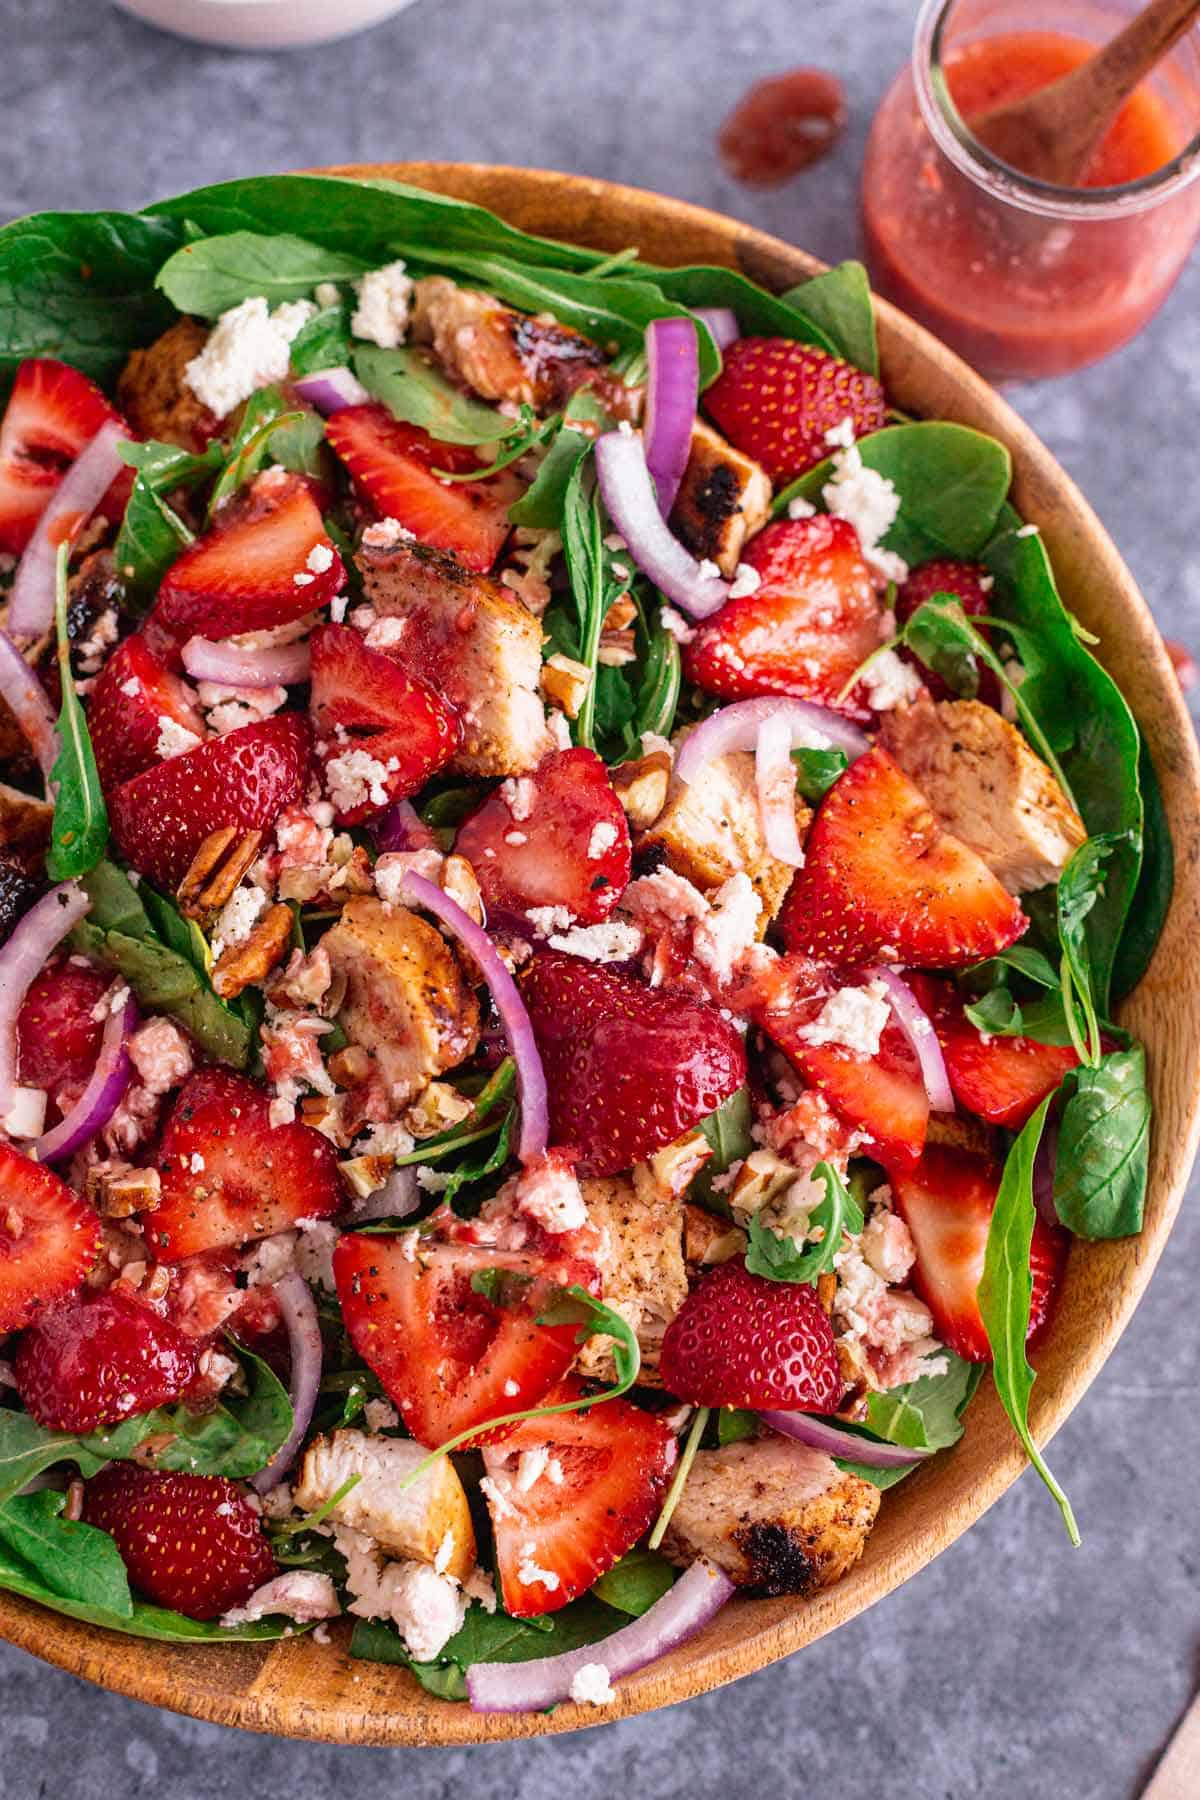 Chicken Salad With Strawberries in a wooden bowl